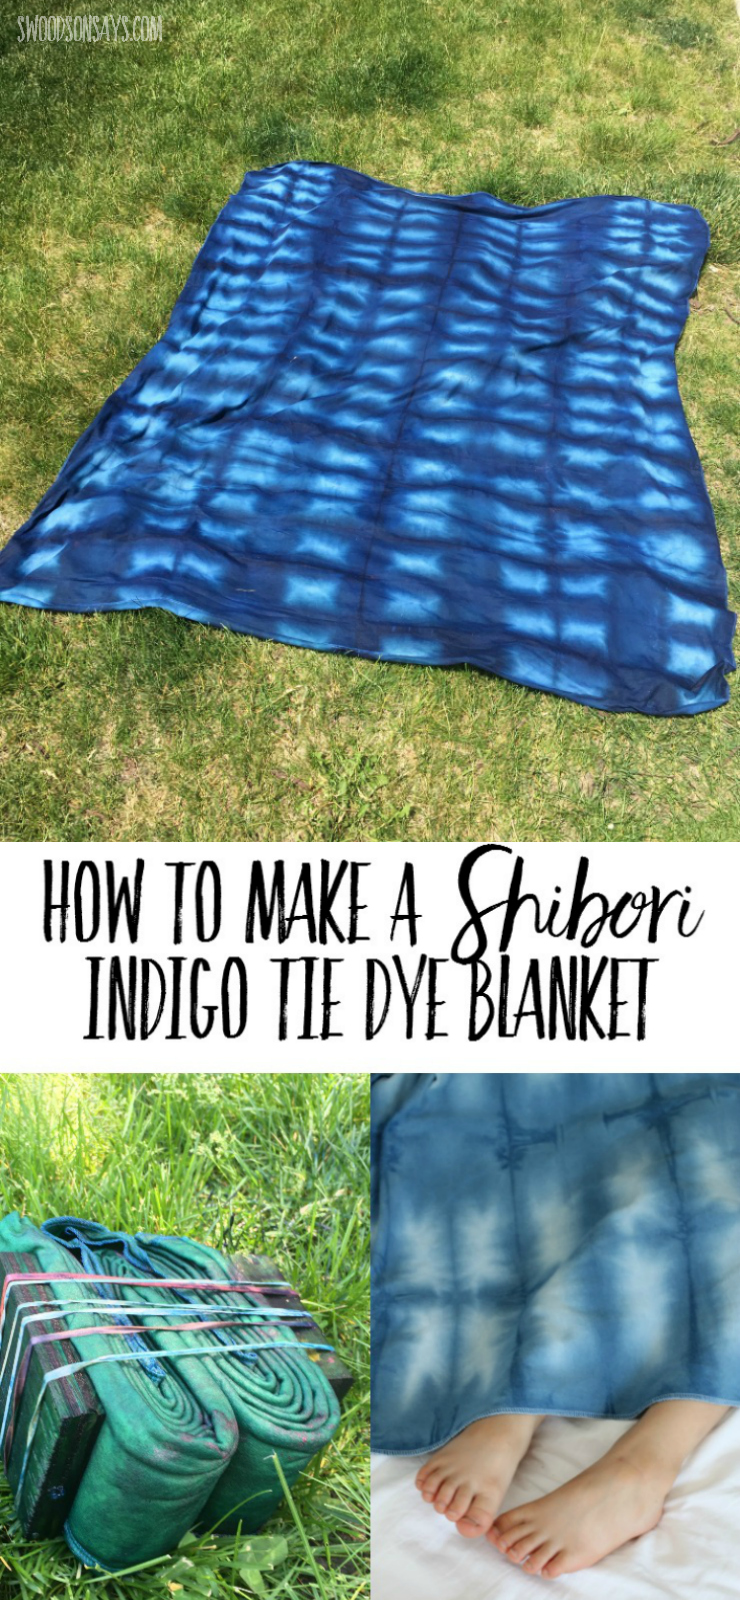 Read this easy tutorial for how to make a shibori indigo tie dye blanket! Super simple, single layer organic fleece is perfect for snuggling.